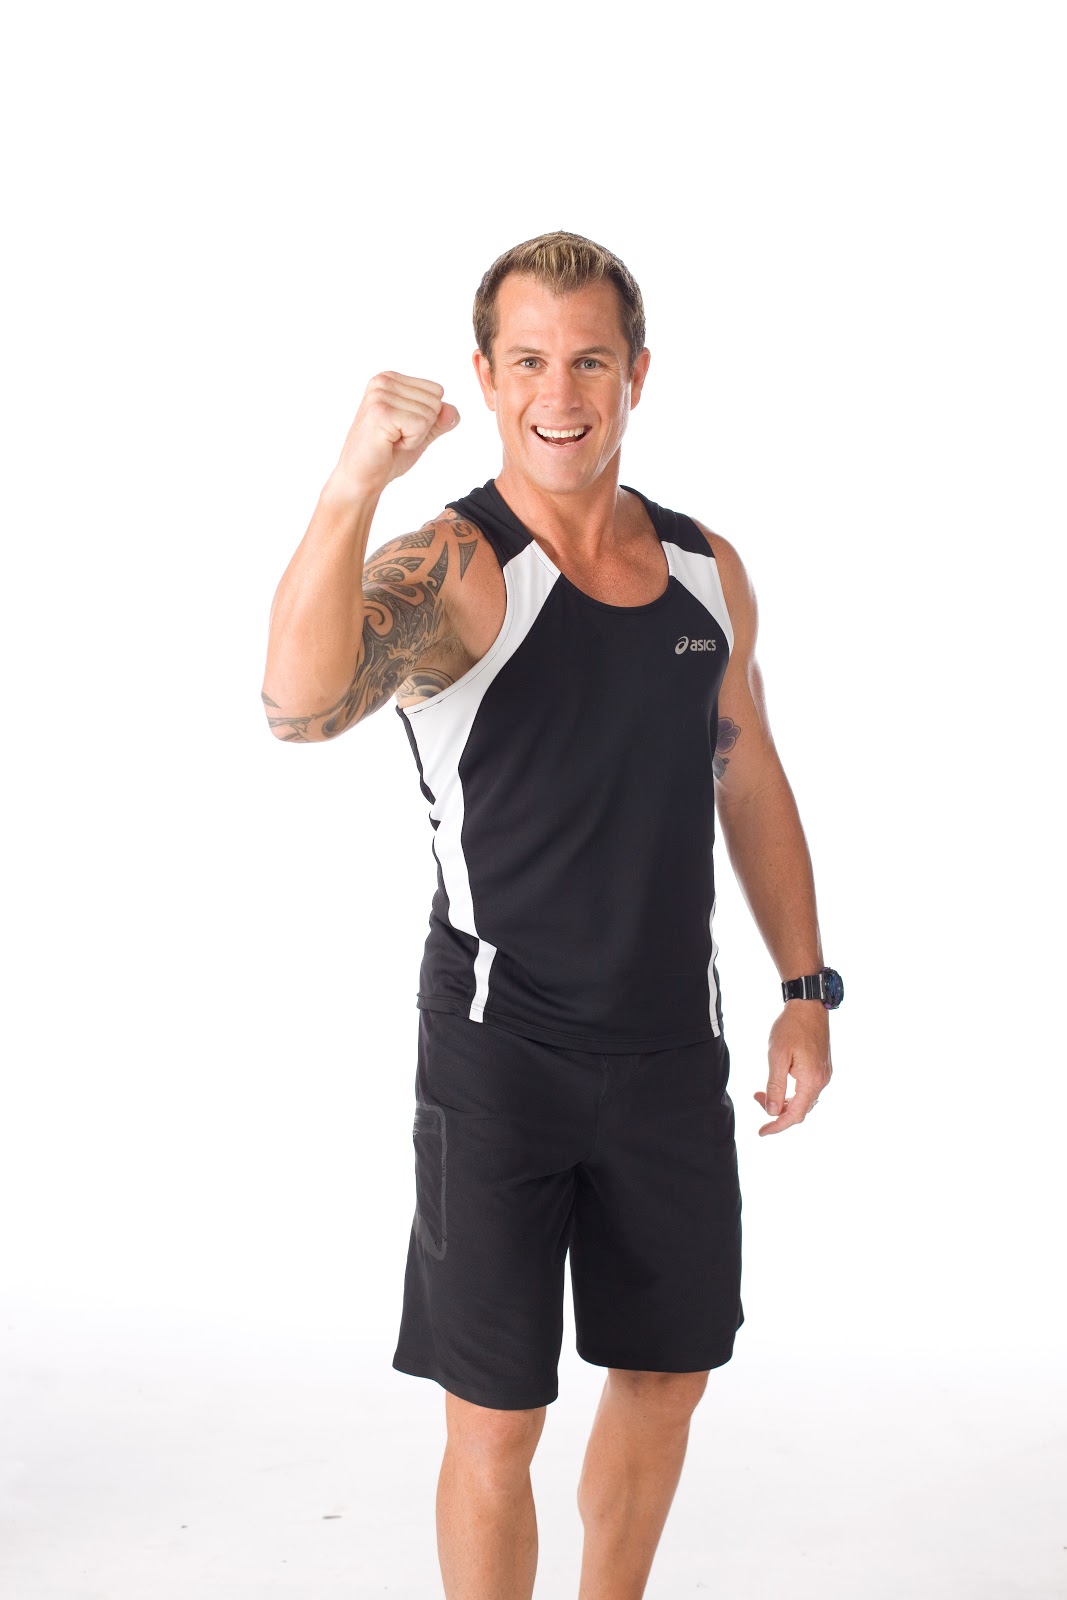 5 Day Shannan Ponton Workout for Build Muscle